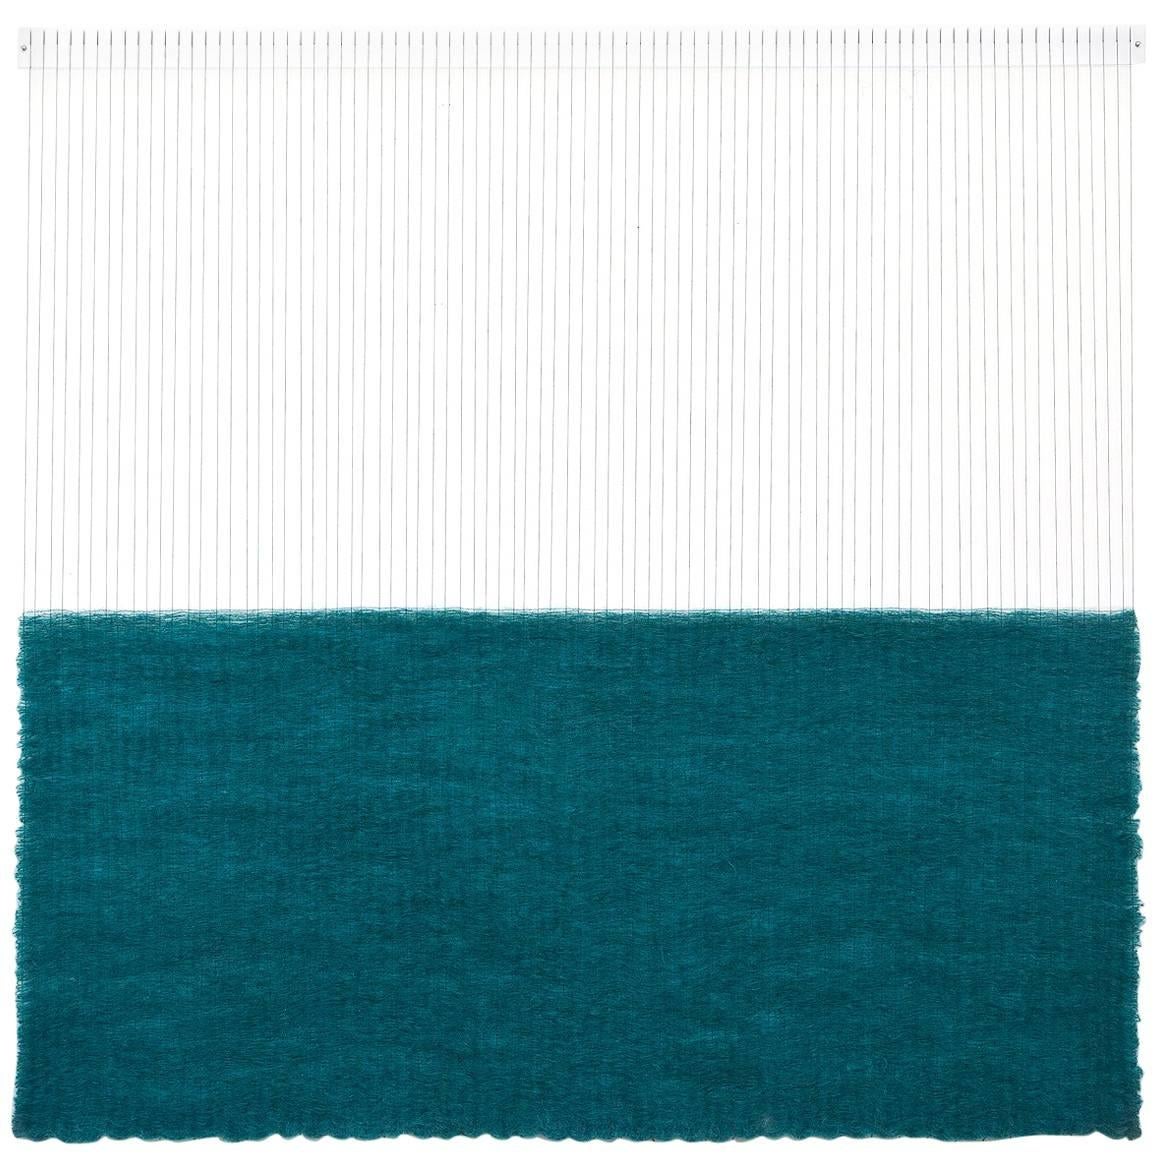 Contemporary Weaving Textile Fiber Art, Heavy Teal Rectangle by Mimi Jung